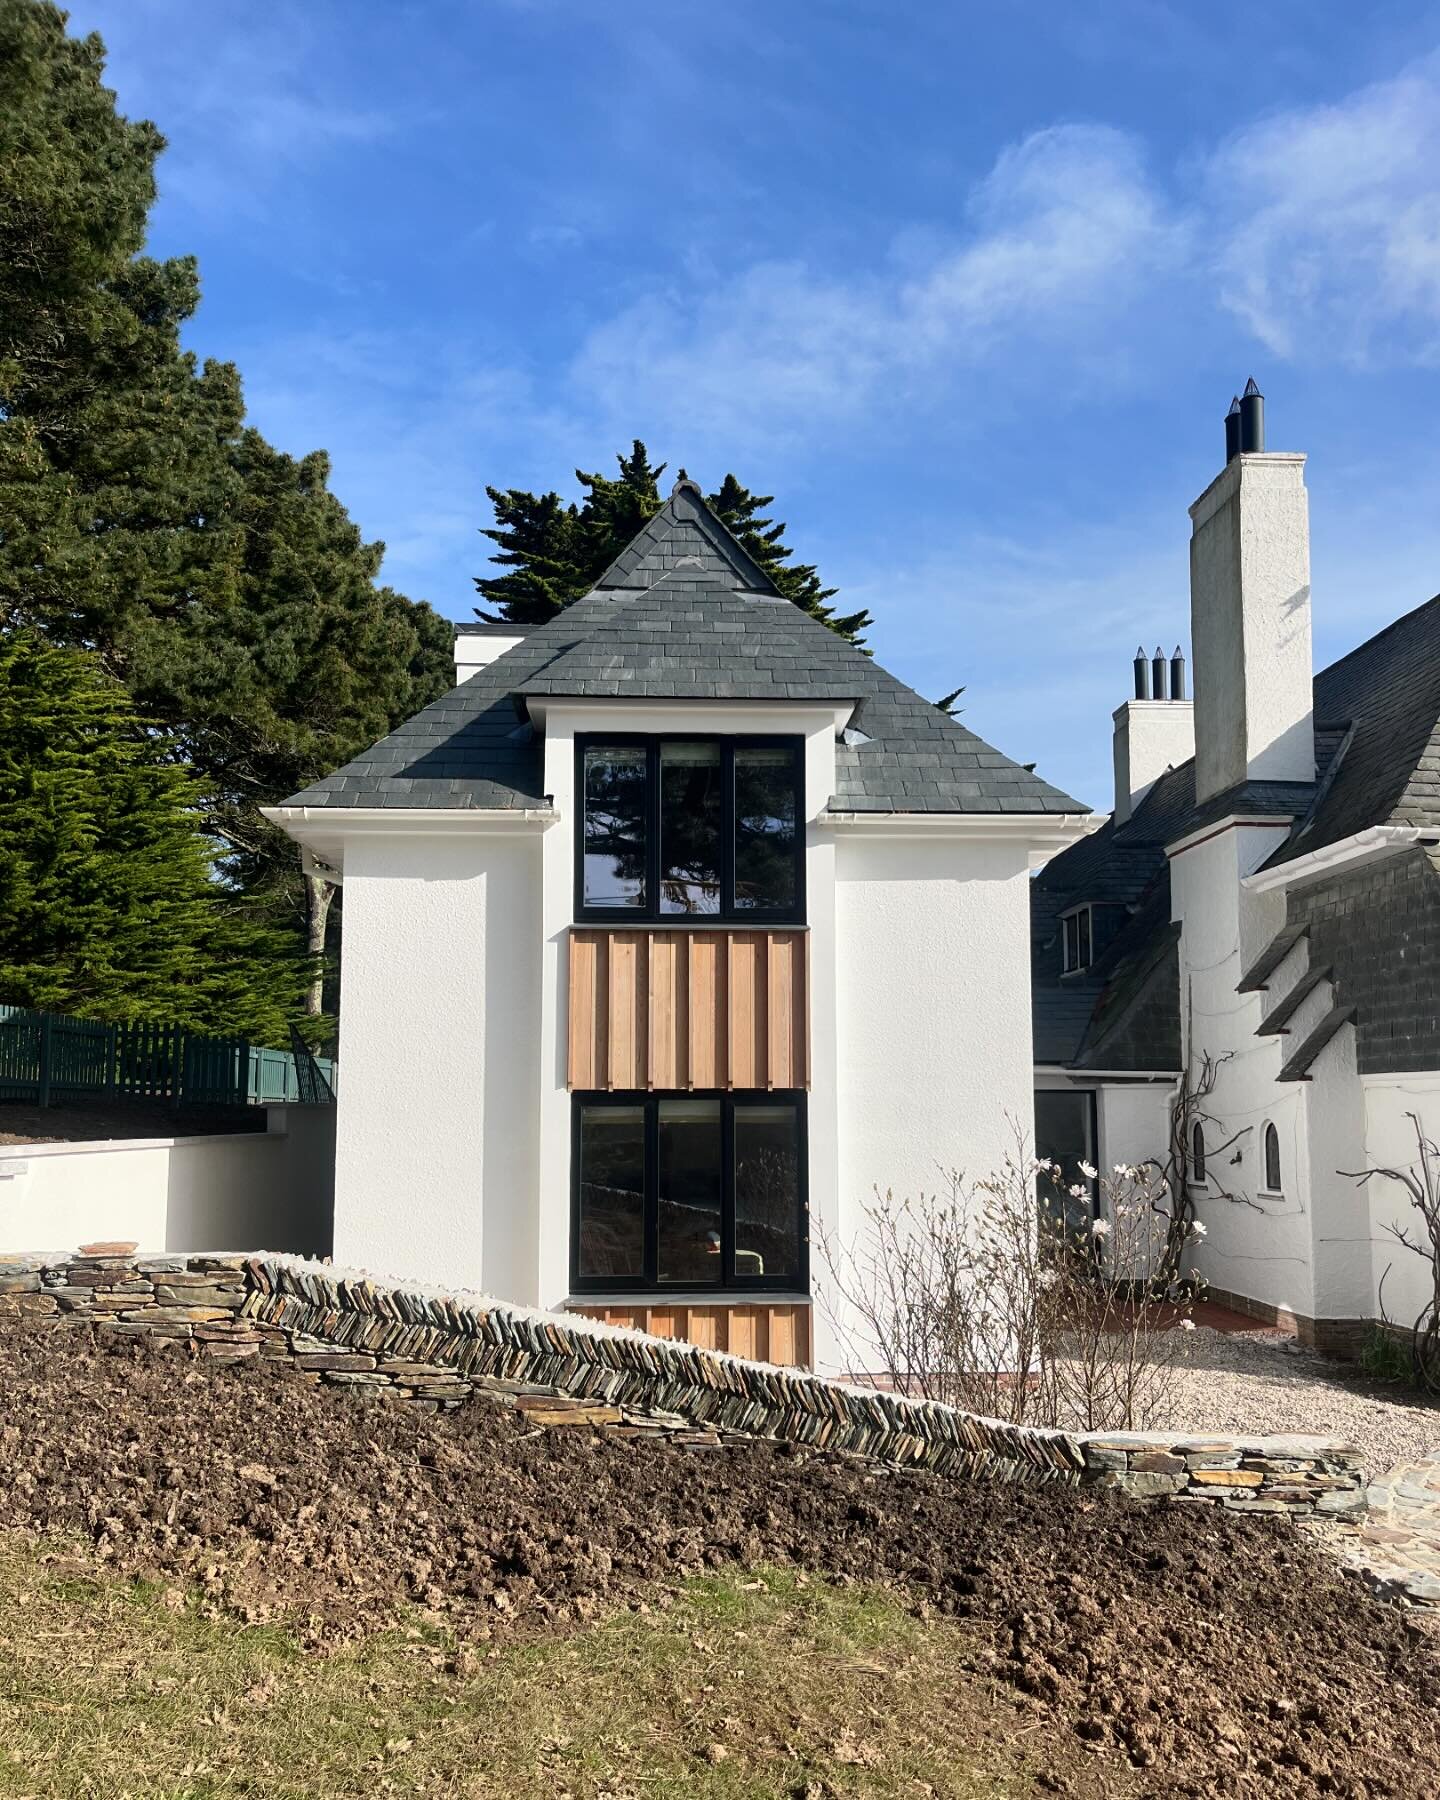 Our recently completed project, an extension to an Arts &amp; Crafts house on the banks of the Percuil river, where we were involved inside and out. Planting to follow by @jamesandcook_landscapes 
Looking forward to getting photographed towards the e